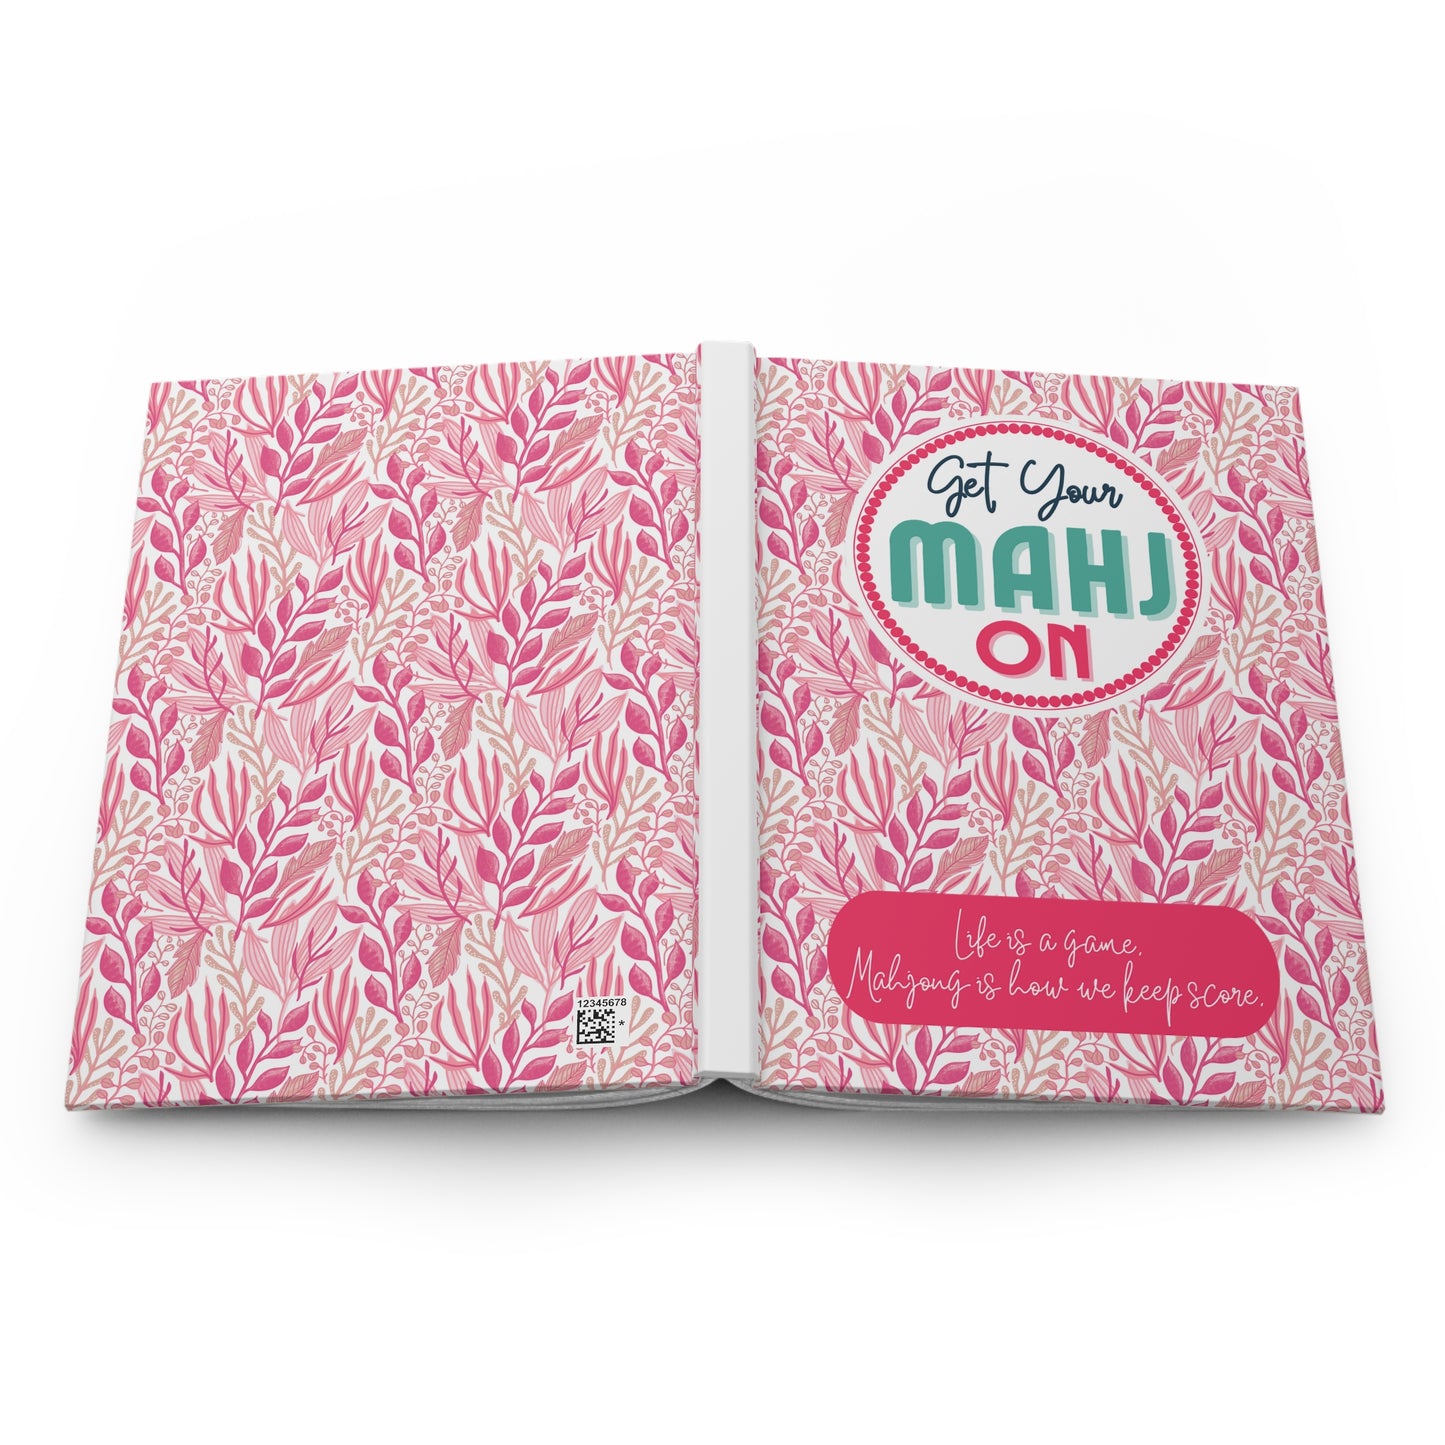 Mahjong Score Notebook, Pink- Mah-jongg journal to note memories and scores through time. Great gift!